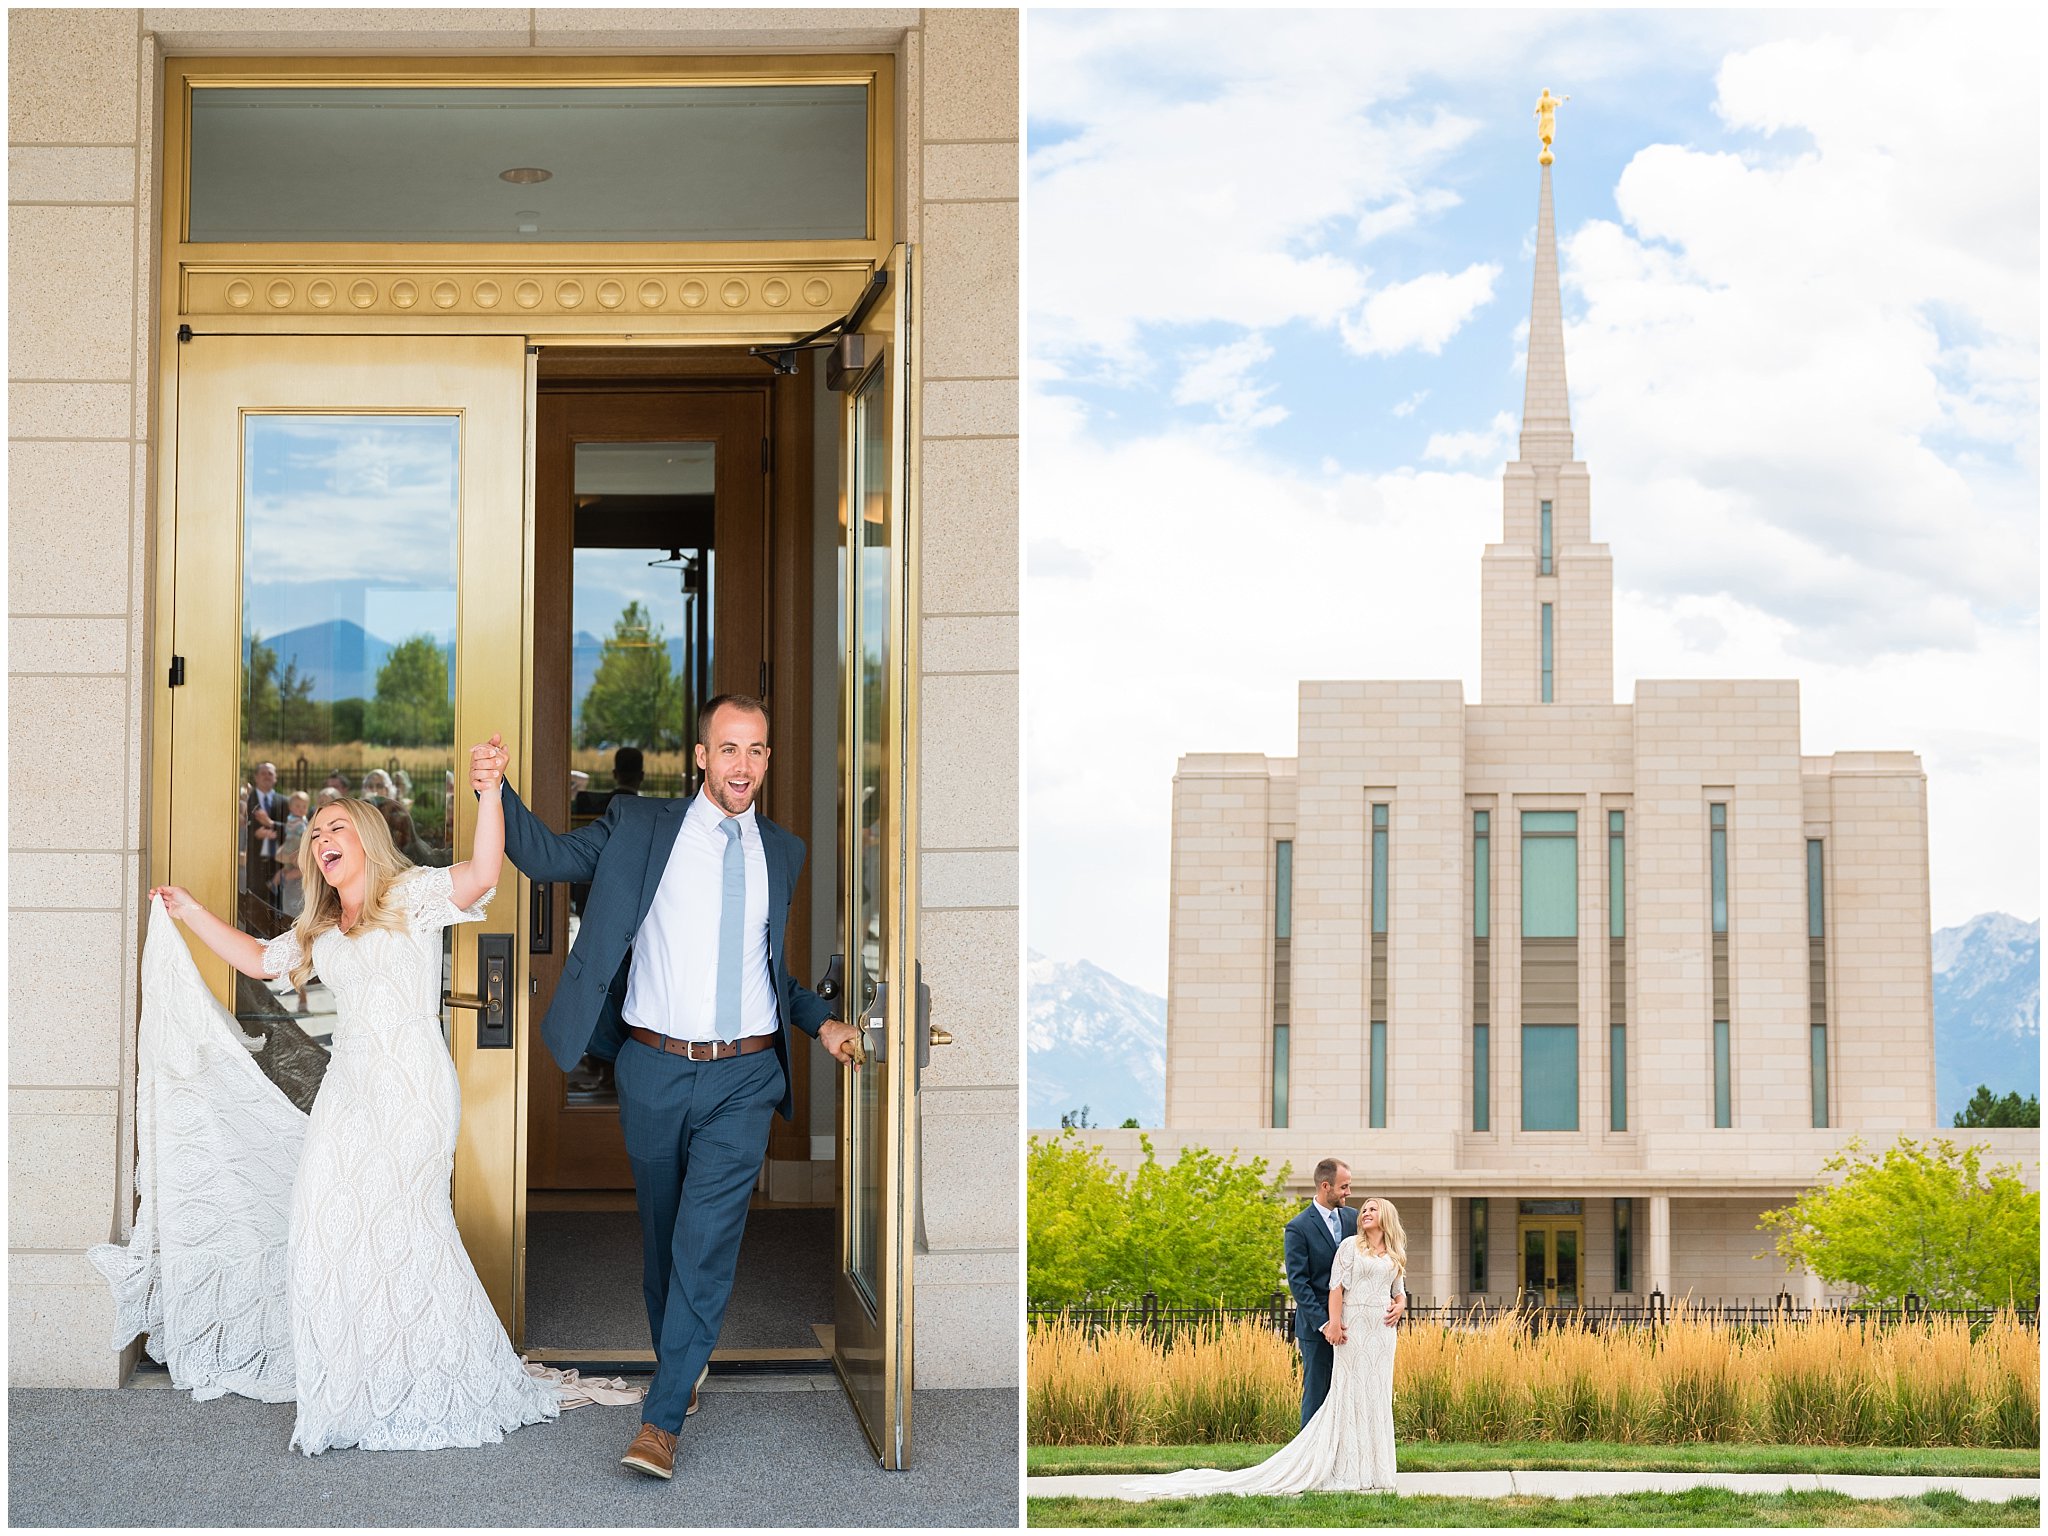 Couple exiting the temple | Summer Carnival and Oquirrh Mountain Temple Wedding | Jessie and Dallin Photography